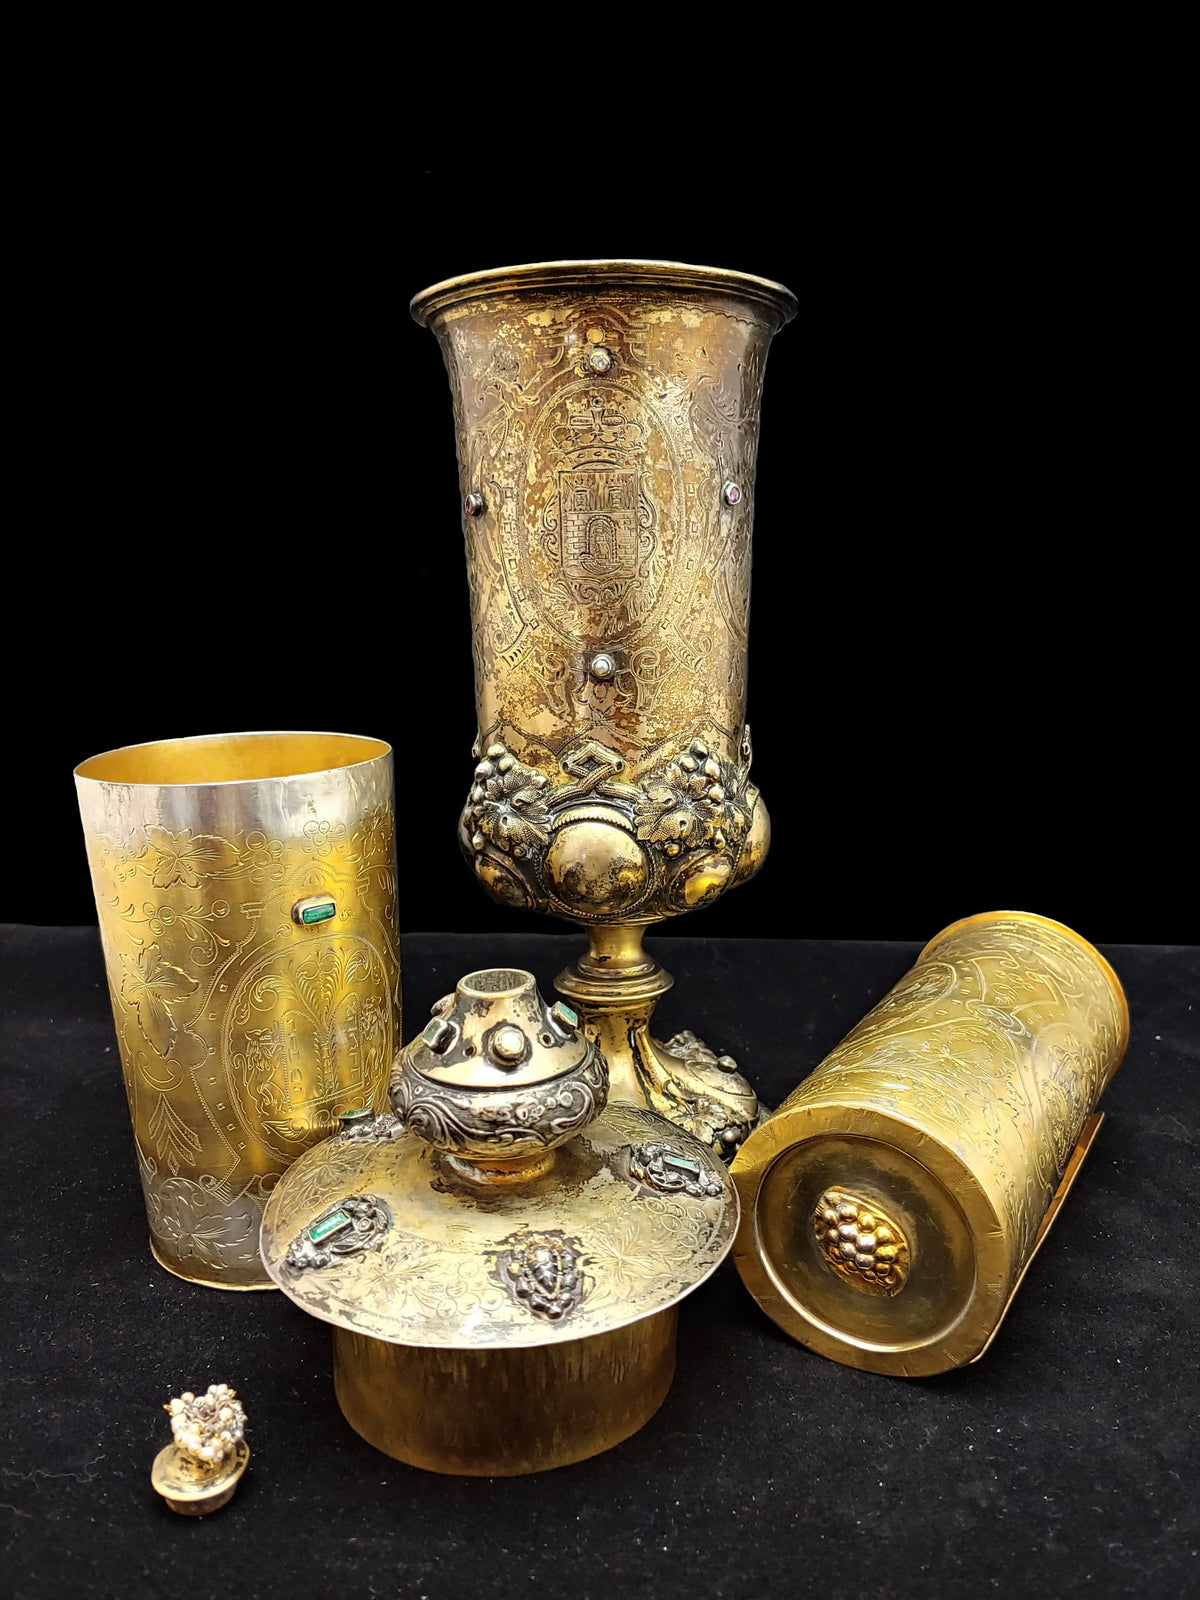 Ceremonial Judaica w/ Esther Scroll and Kiddush Cup